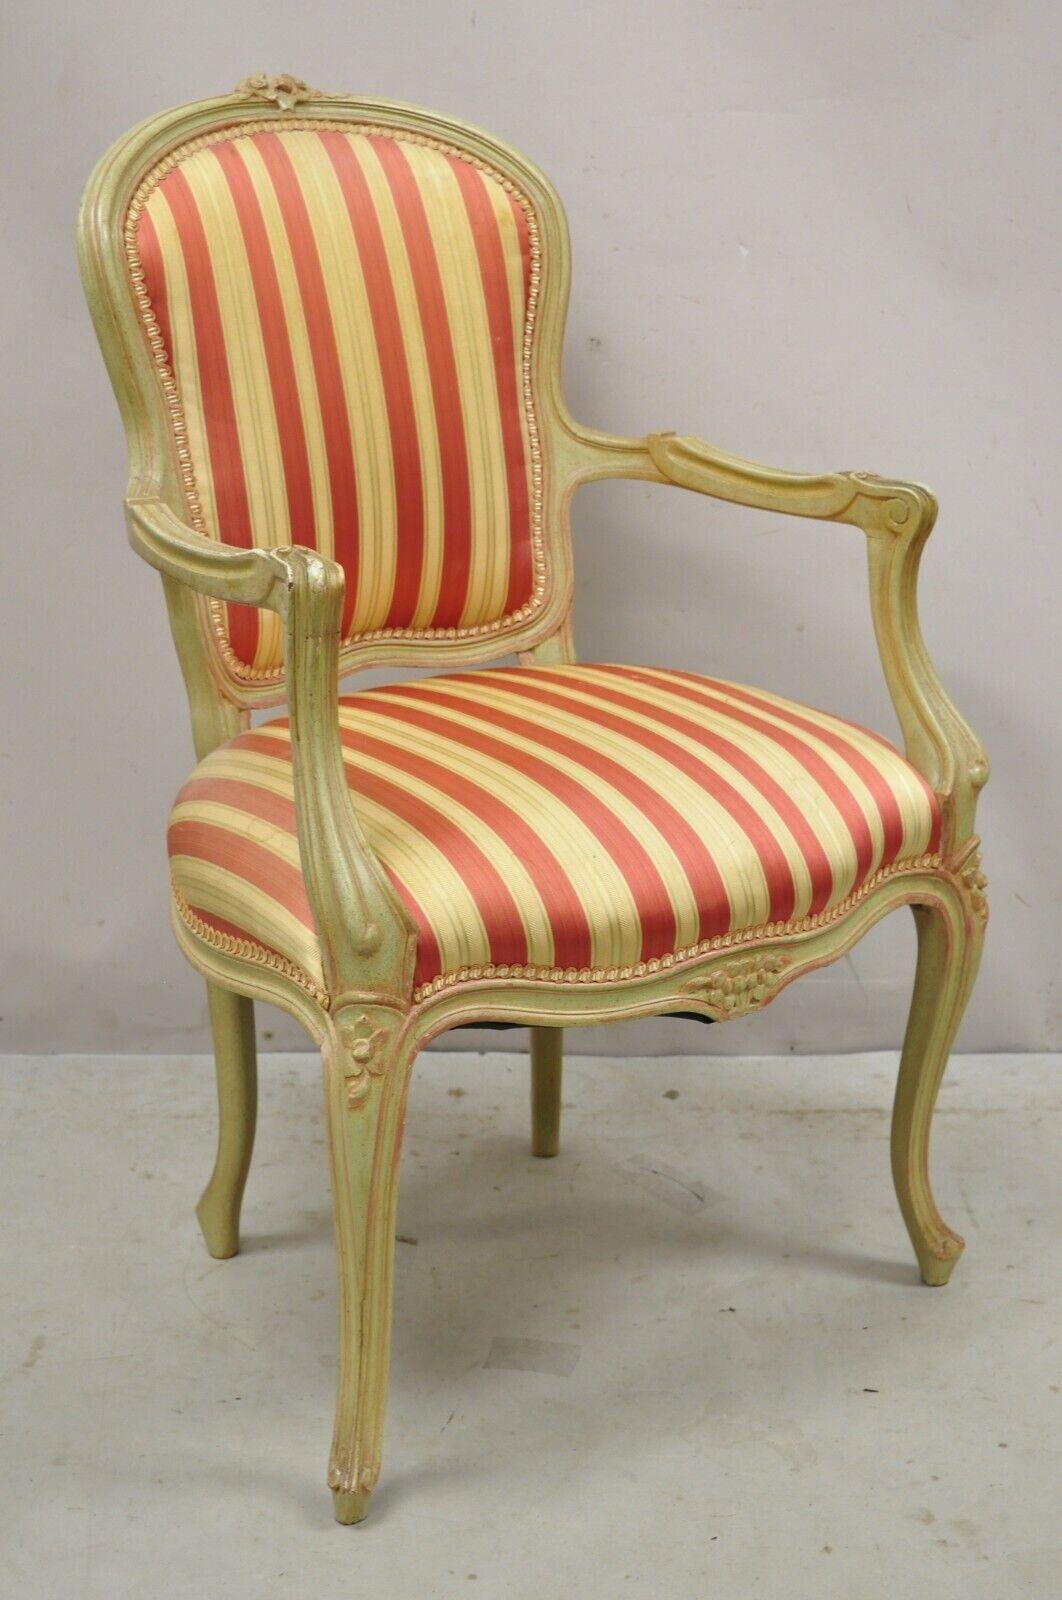 Vintage French Louis XV Style Green & Pink Painted armchair Fauteuil Striped Fabric. Item features green and pink distress painted finish, solid wood frame, nicely carved details, very nice antique item, great style and form, circa Early to Mid-20th